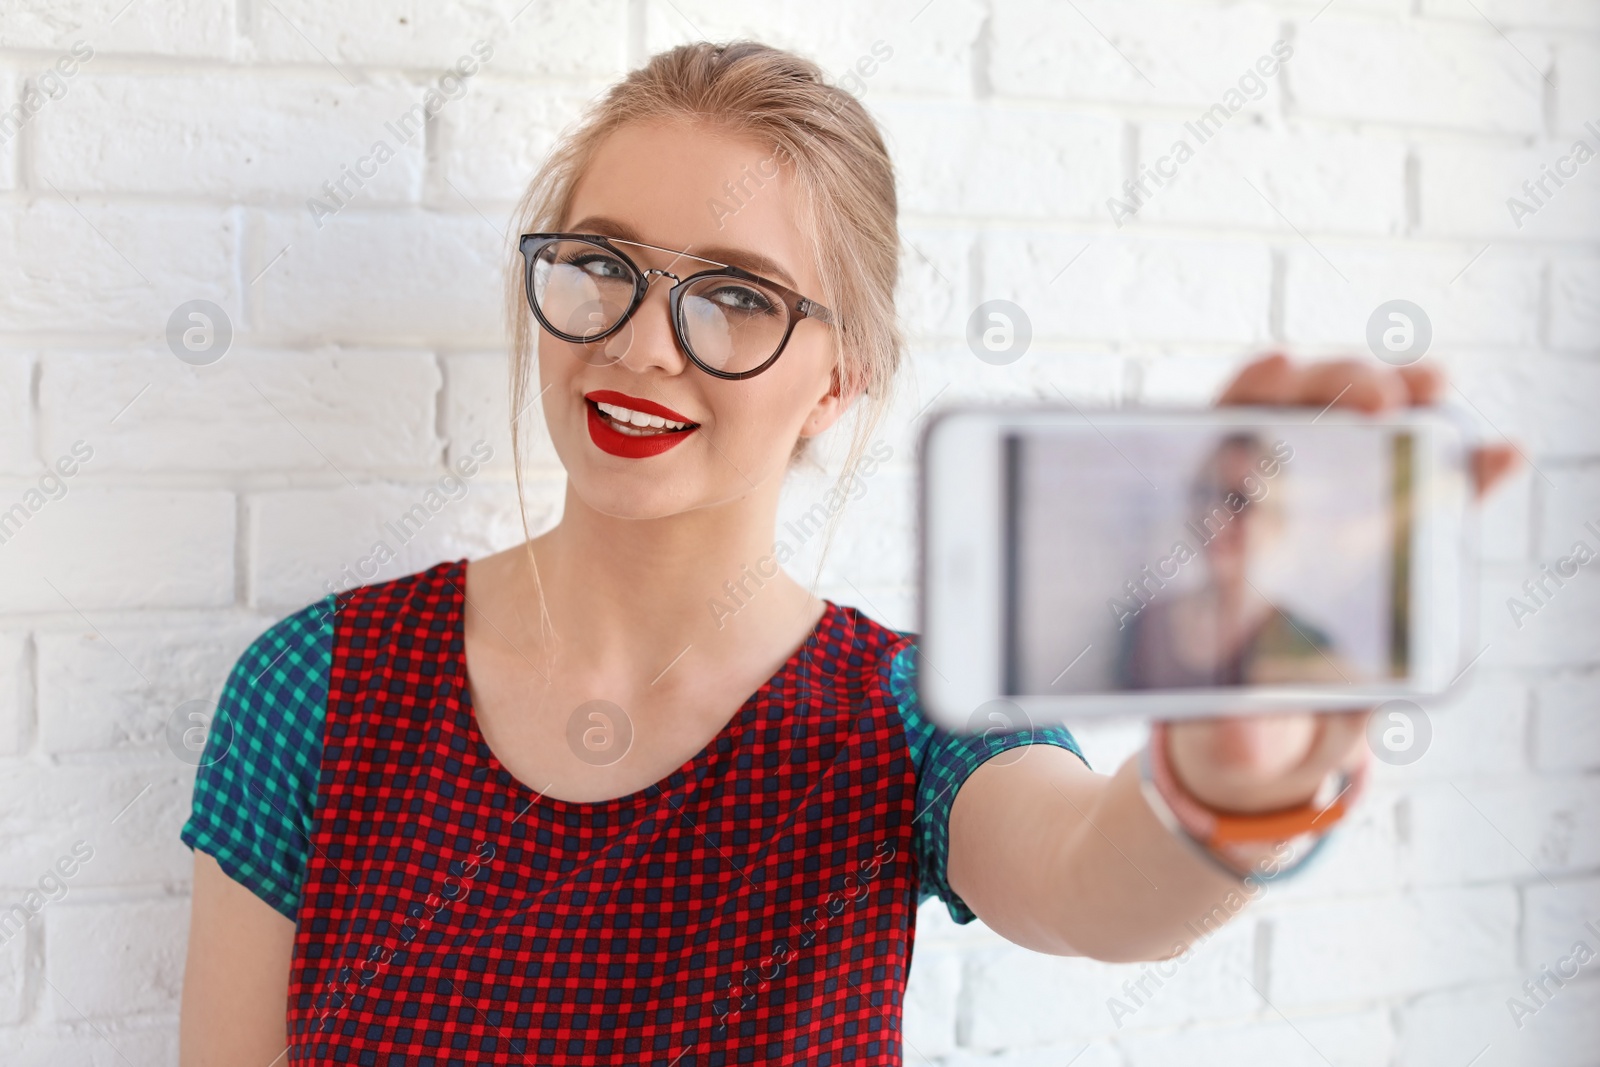 Photo of Attractive young woman taking selfie near brick wall